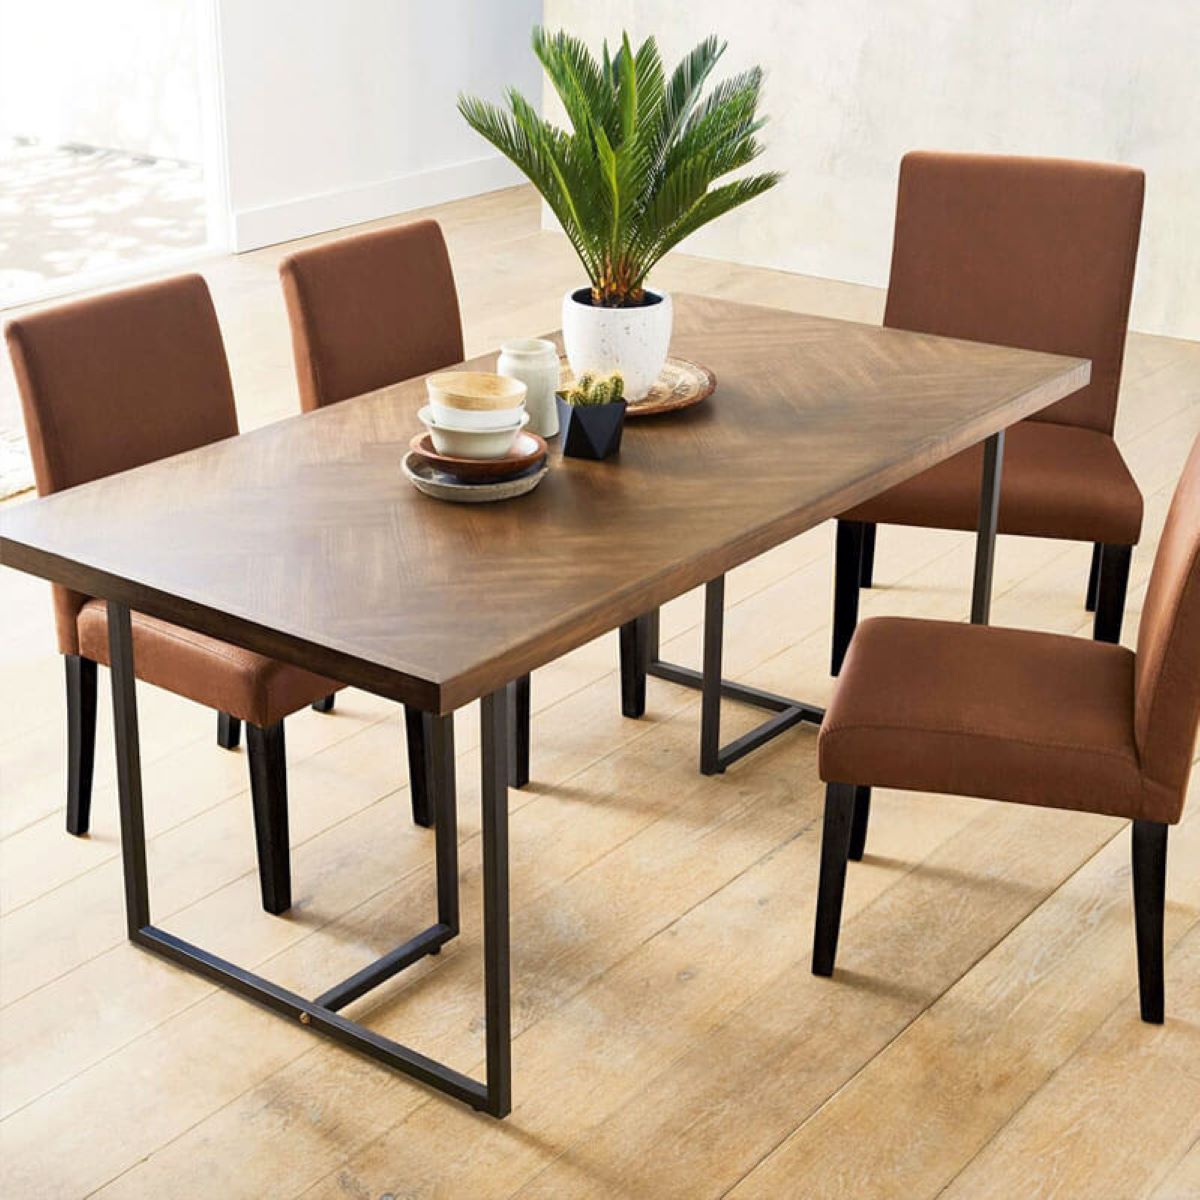 How Wide Is A Typical Dining Room Table